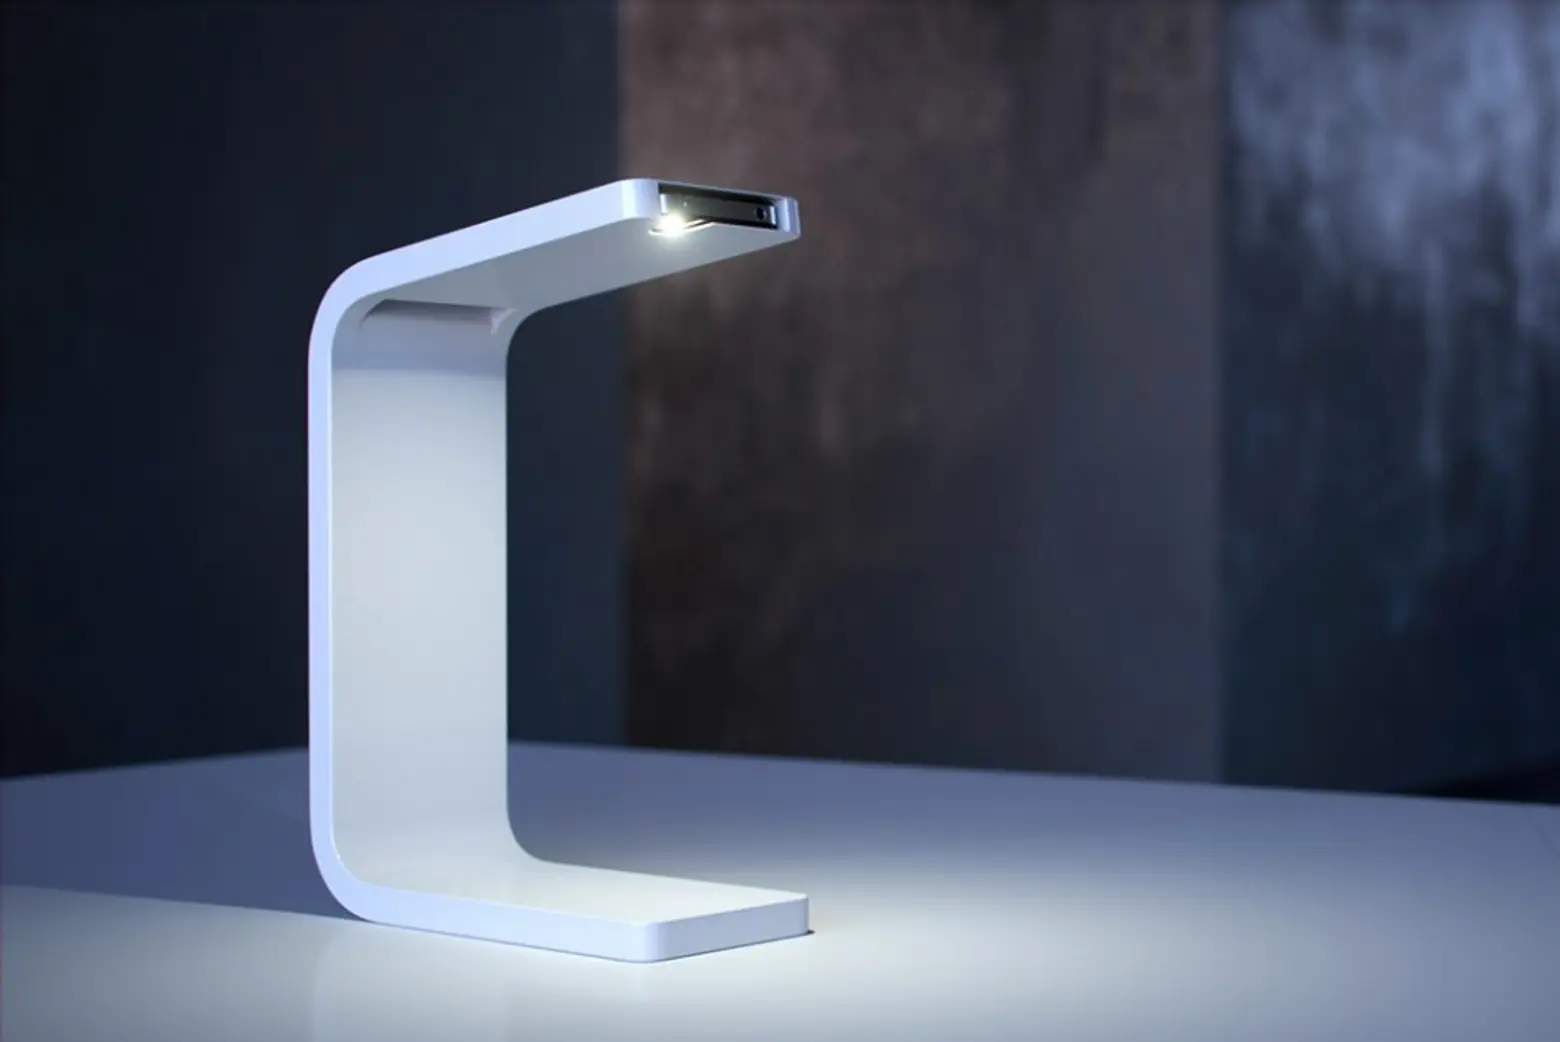 Turn Your Old iPhone Into an Elegant Desktop Lamp